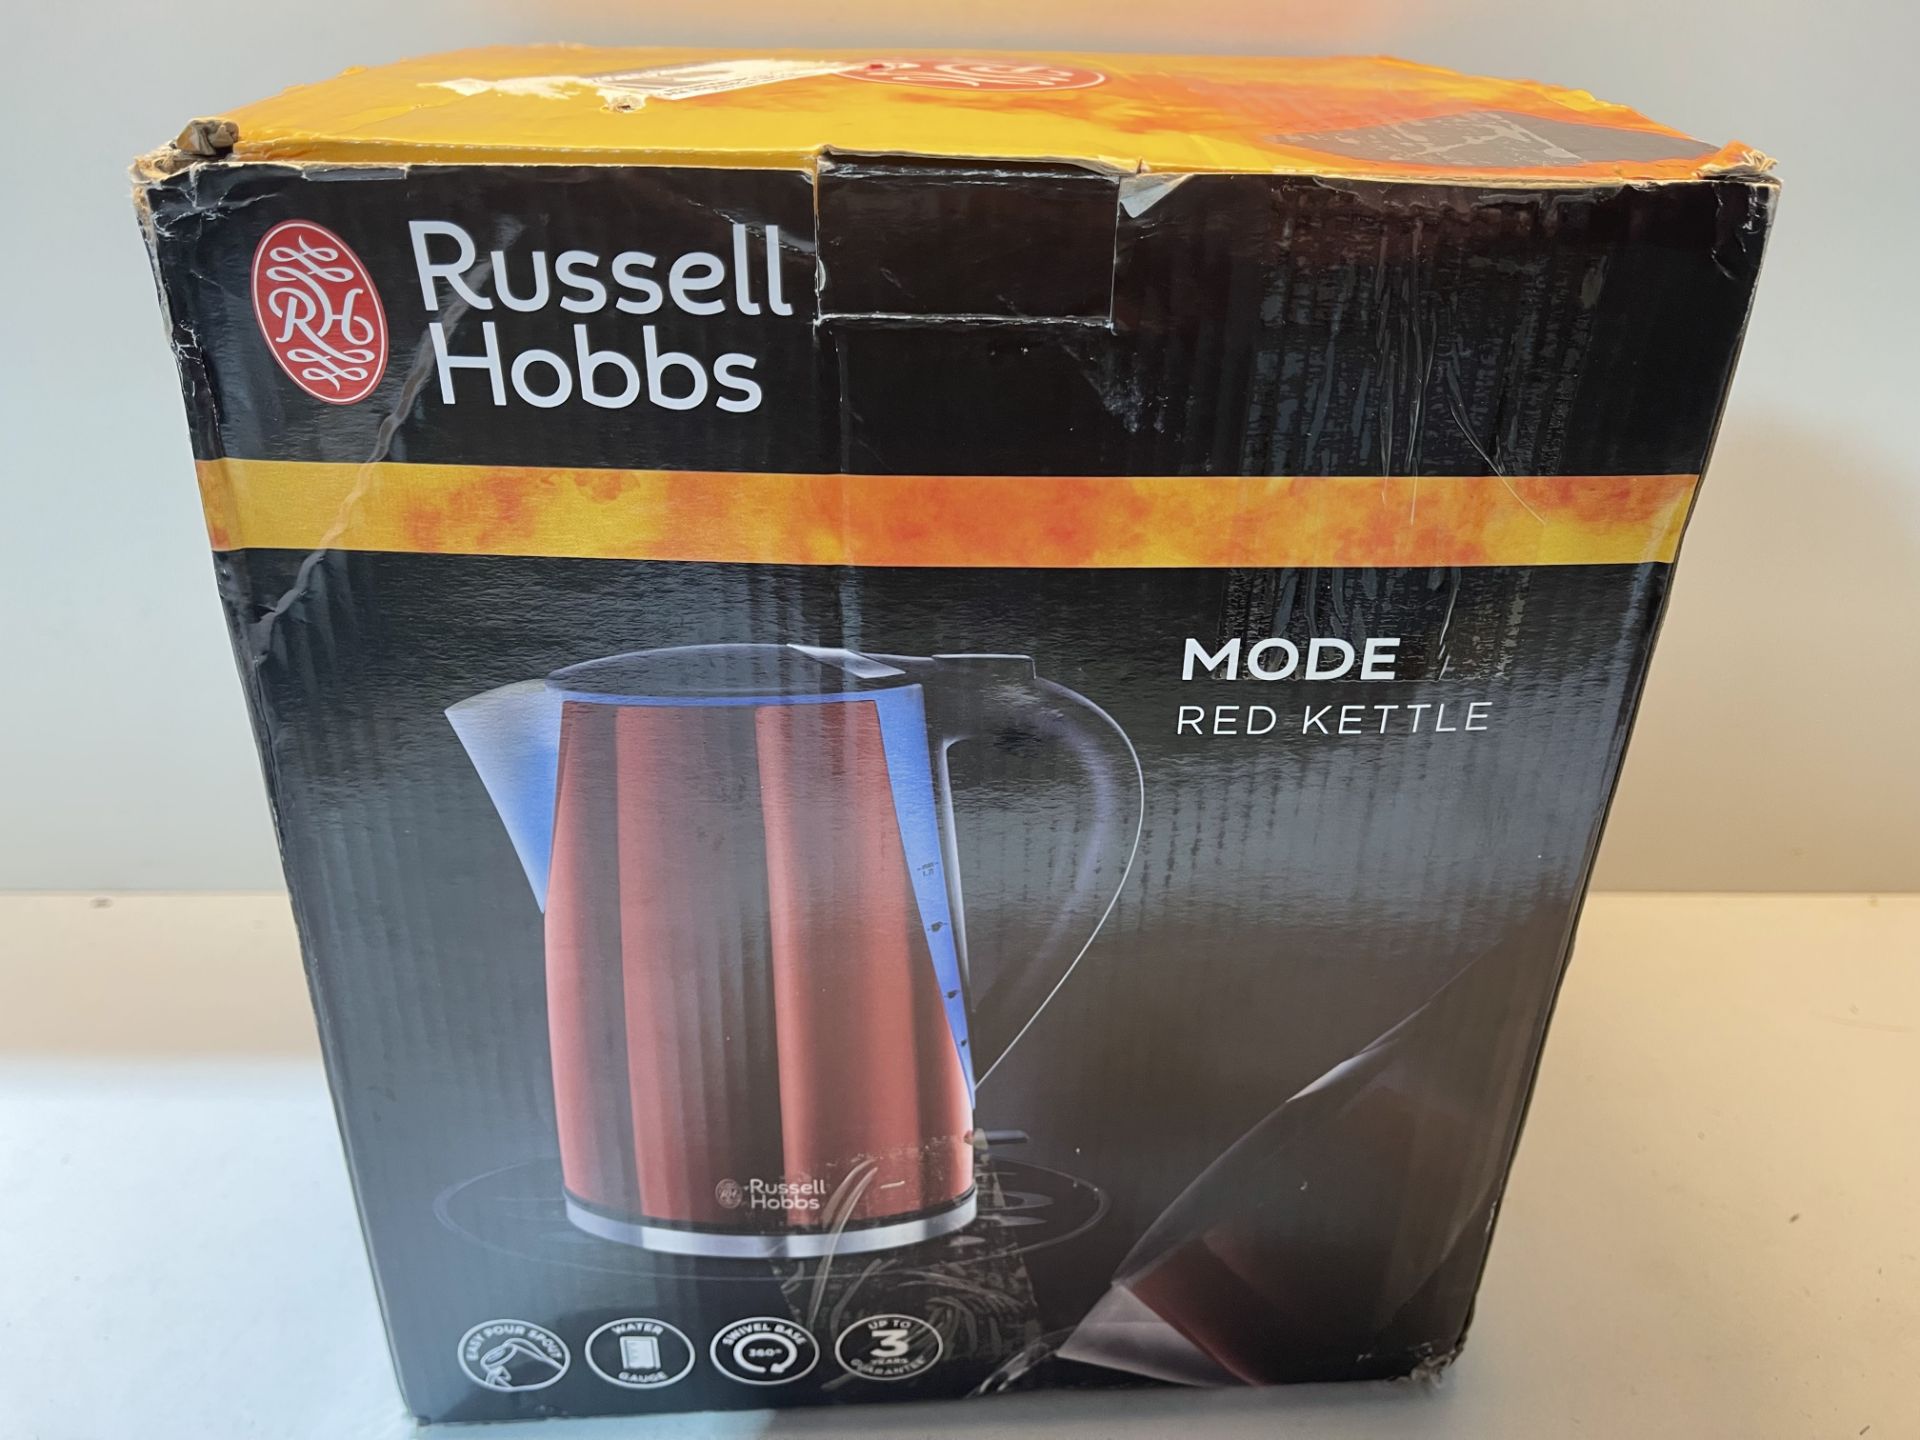 Russell Hobbs Mode Kettle 21401, Red £26.29Condition ReportAppraisal Available on Request- All Items